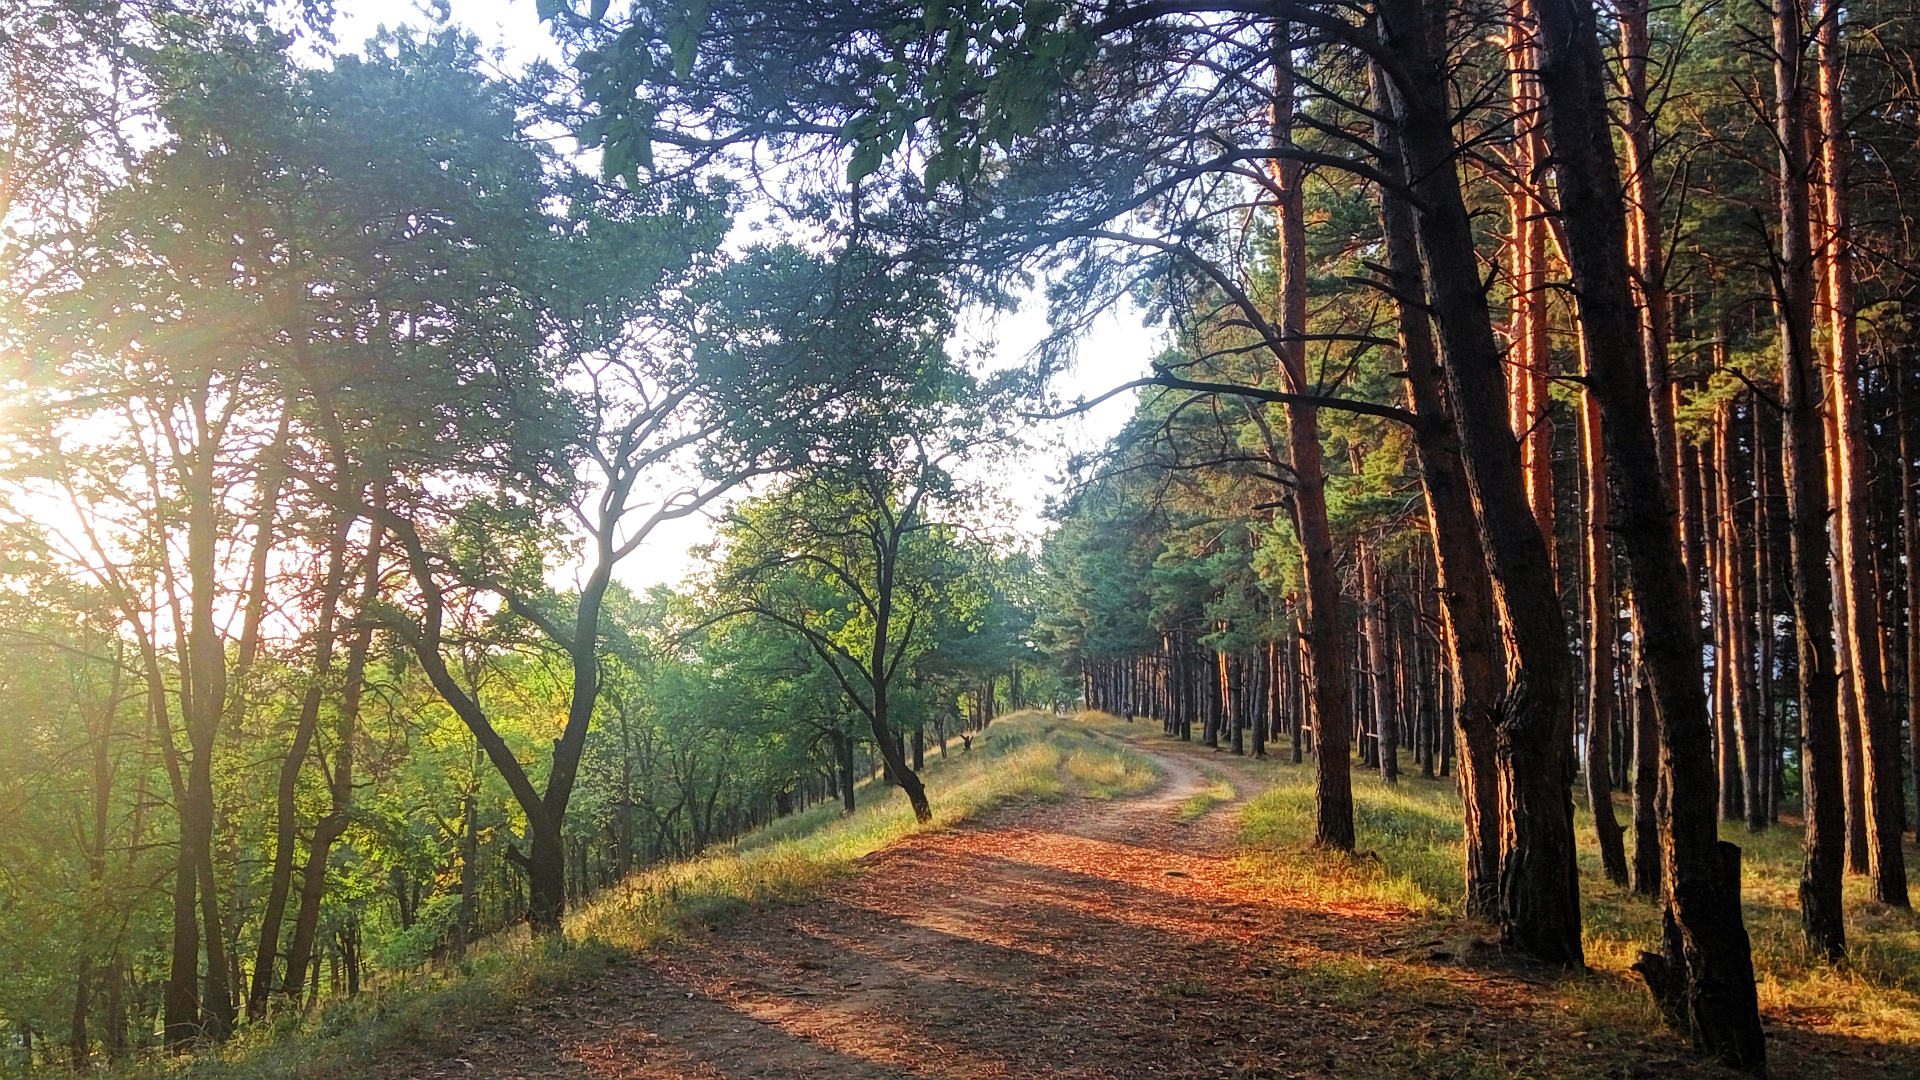 General 1920x1080 landscape nature pine trees evening path sunset forest dirt road